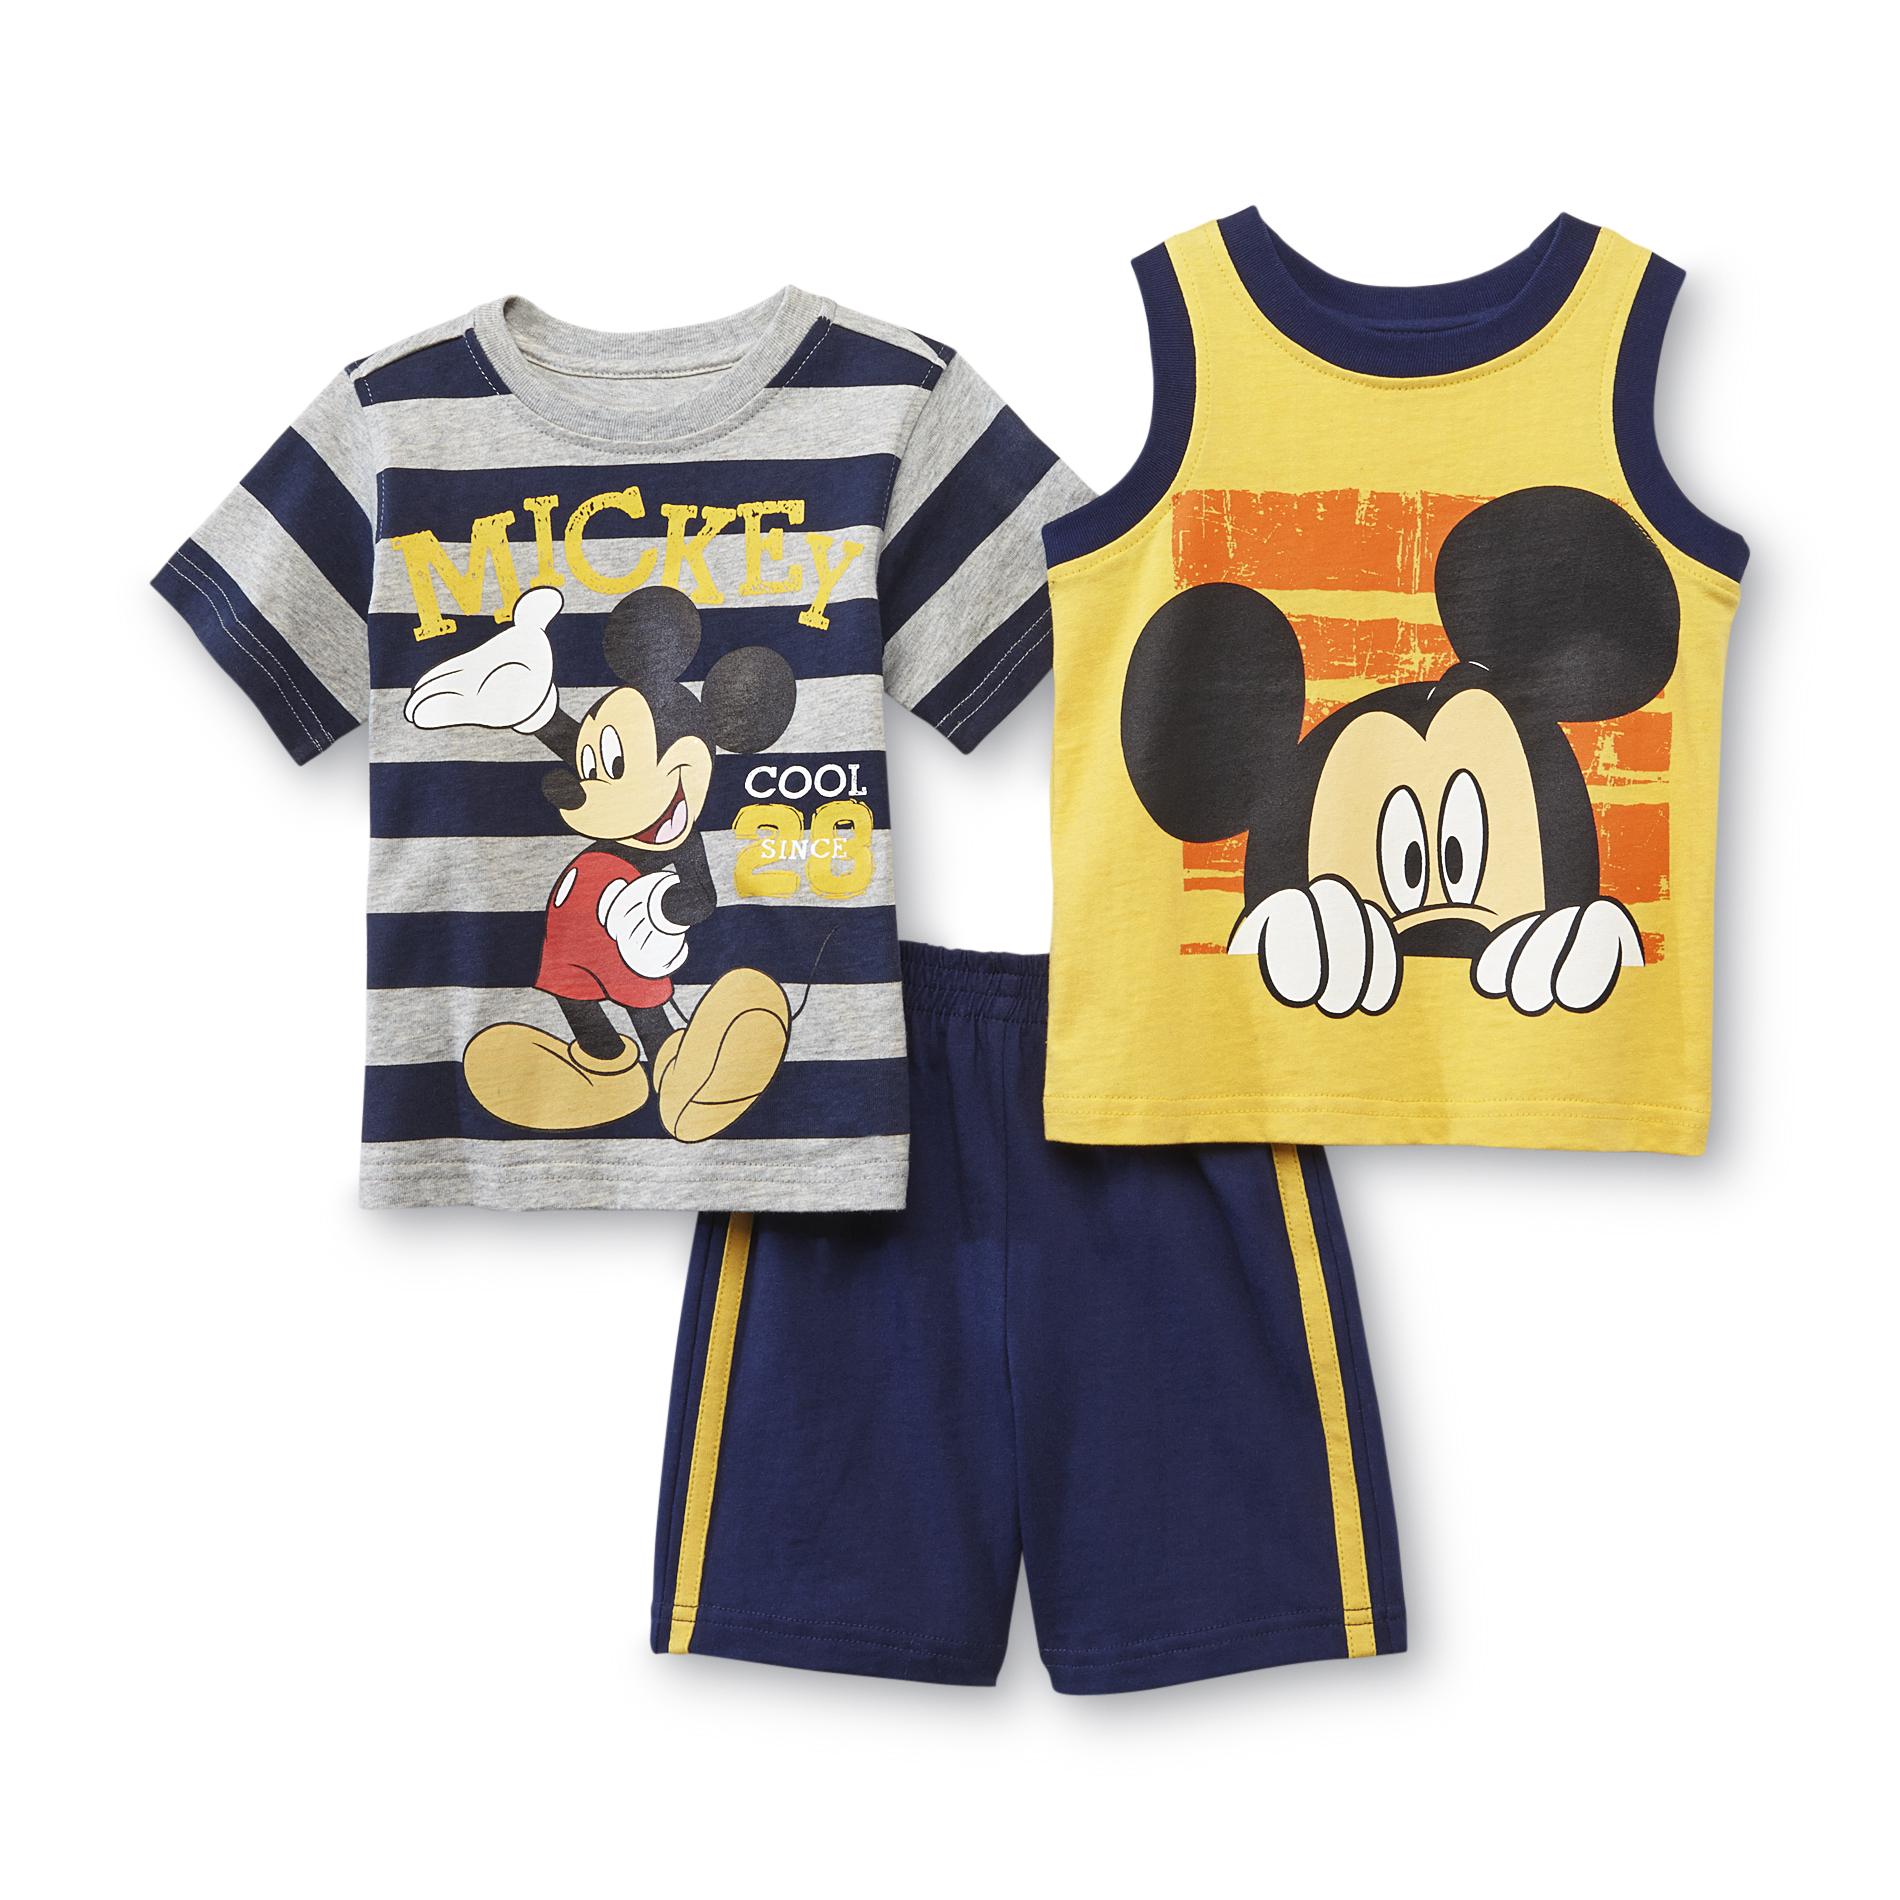 Disney Infant & Toddler Boy's T-Shirt  Muscle Shirt & Shorts - Mickey Mouse